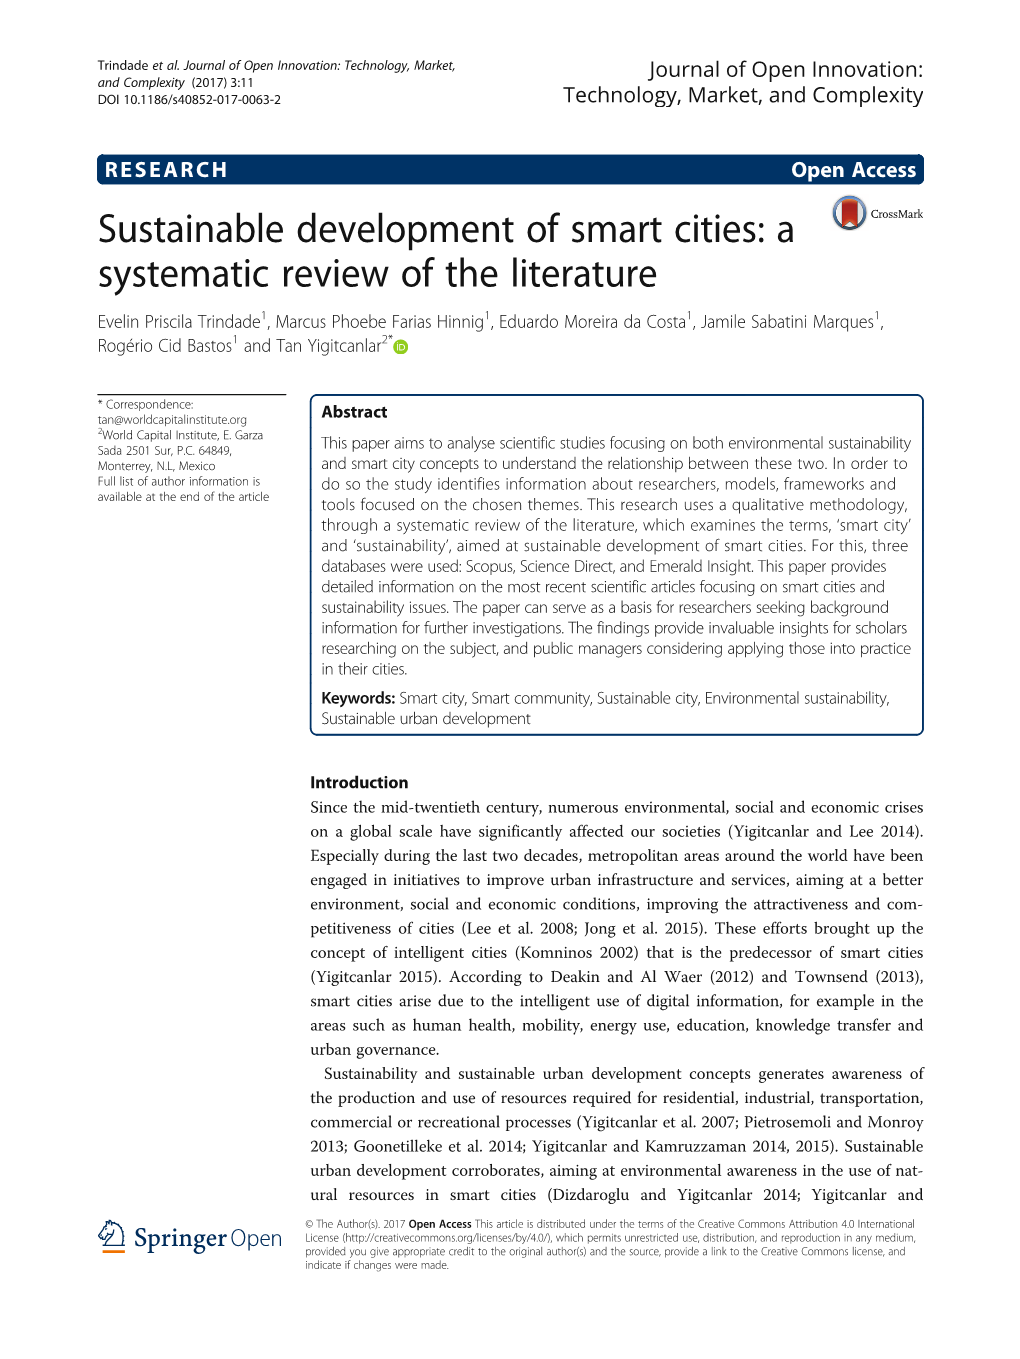 Sustainable Development of Smart Cities: a Systematic Review of the Literature